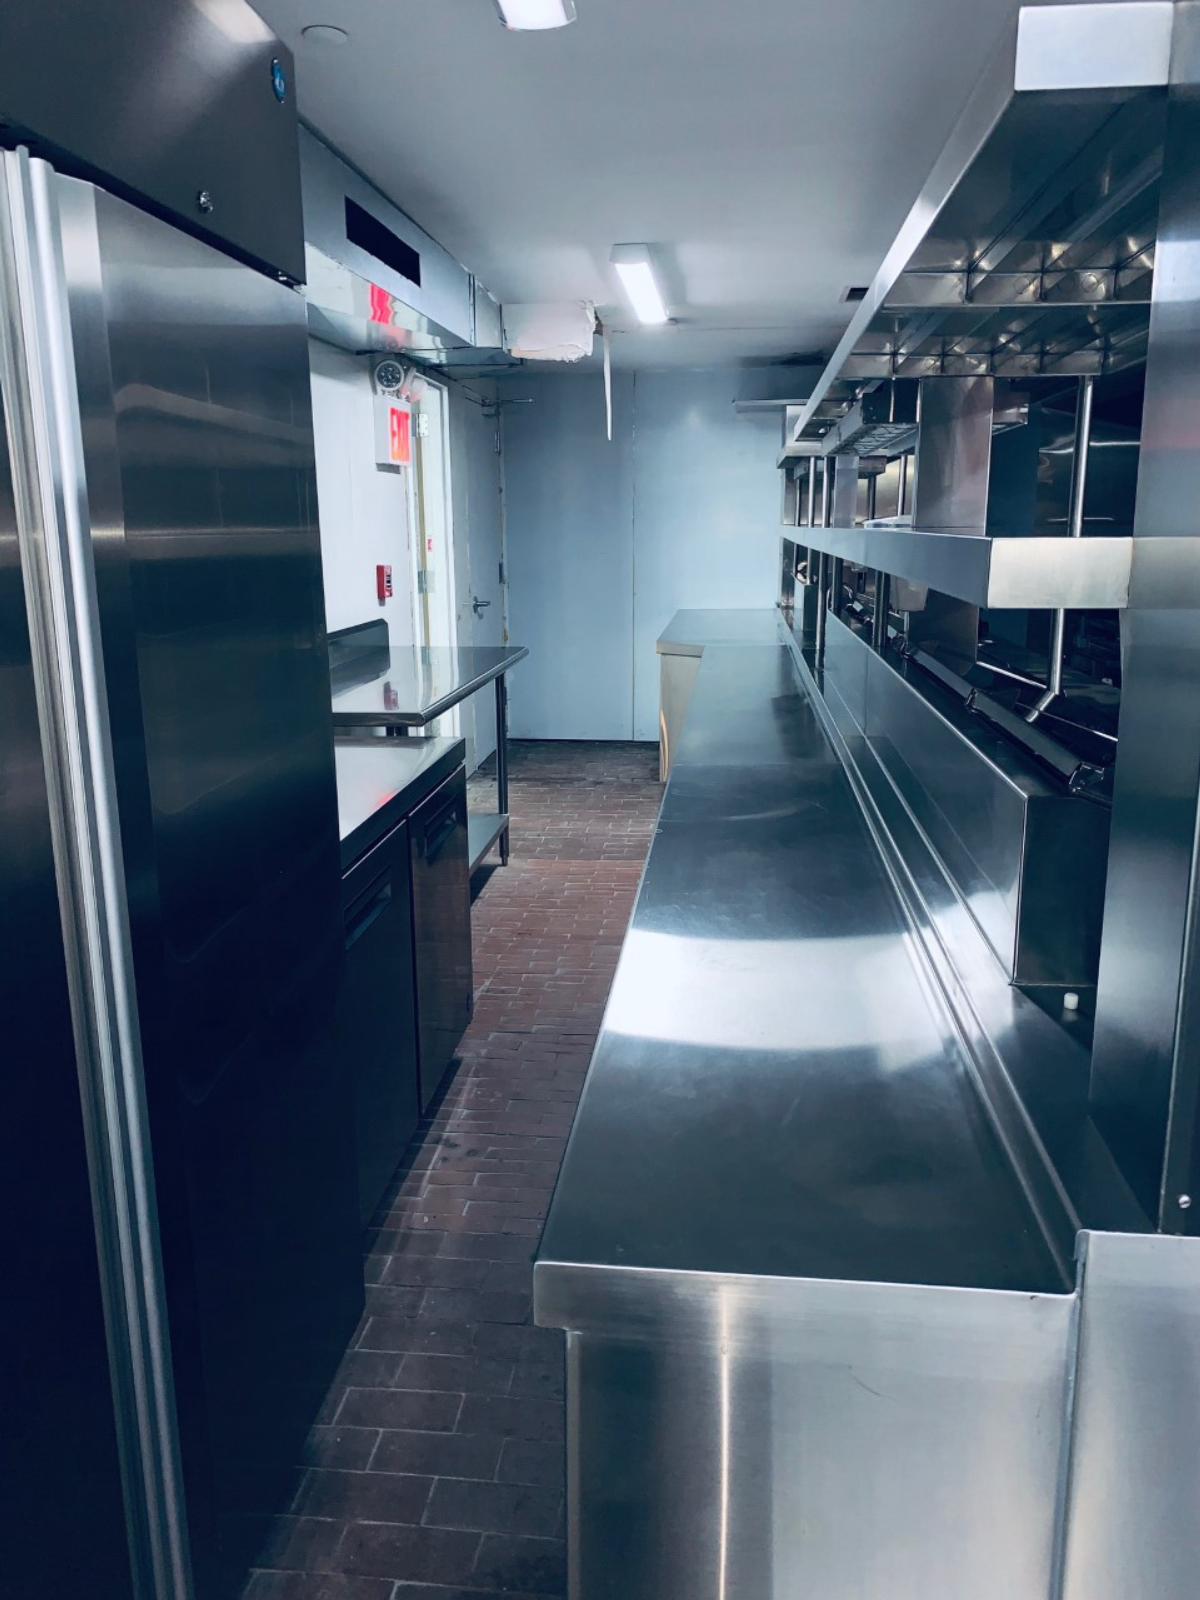 Startups building the next generation of ghost kitchen concepts